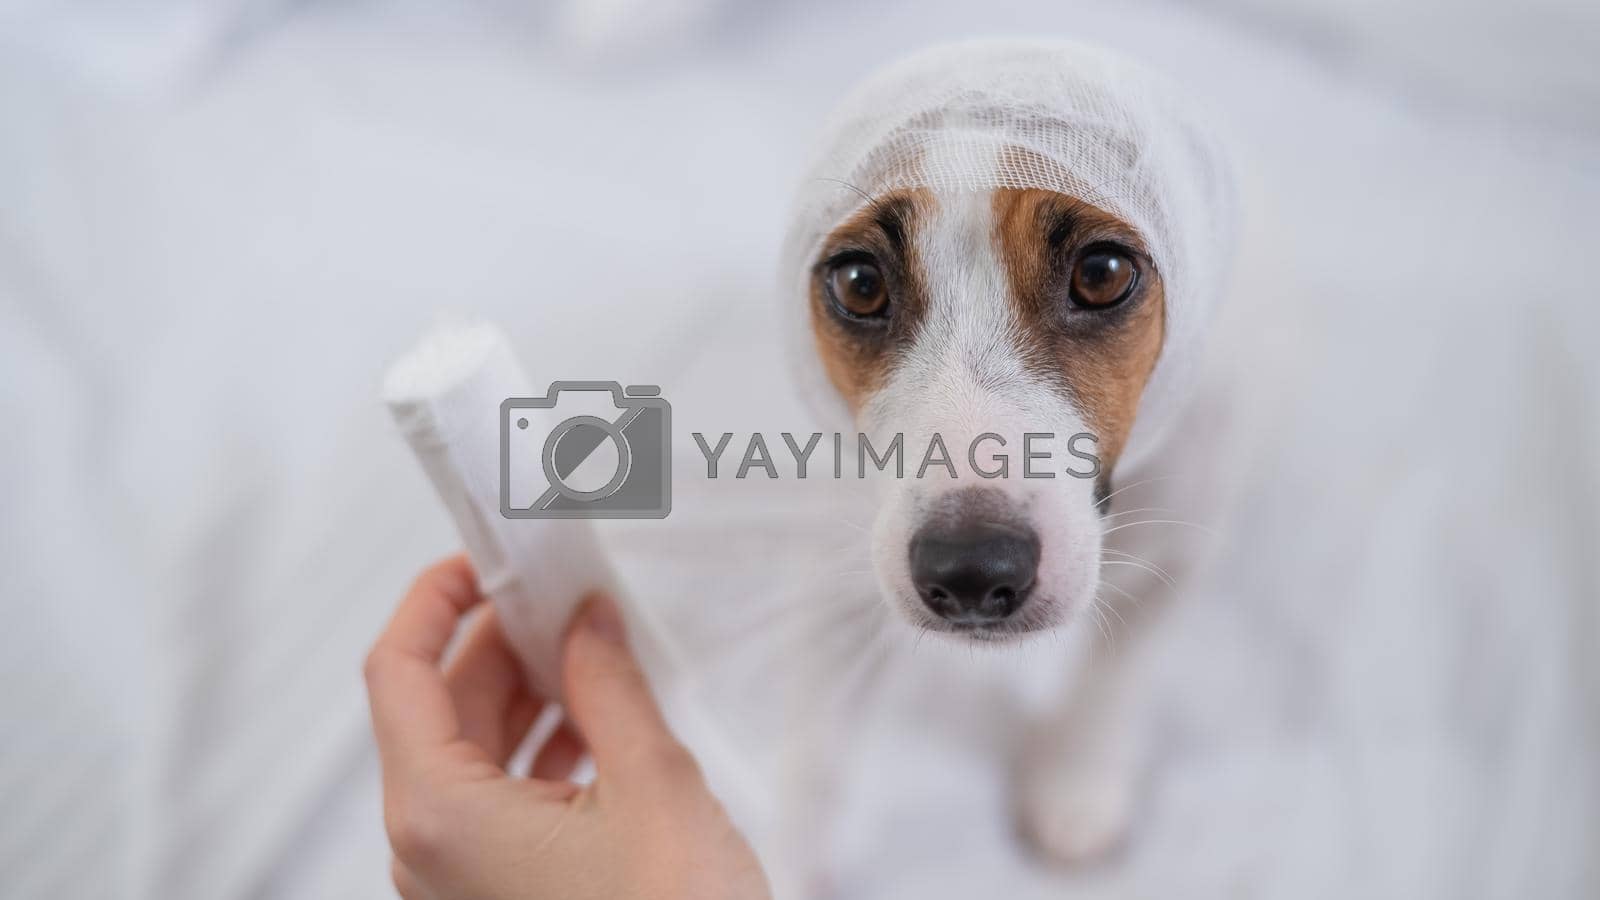 Royalty free image of Veterinarian wraps a bandage around the head of a dog Jack Russell Terrier. by mrwed54